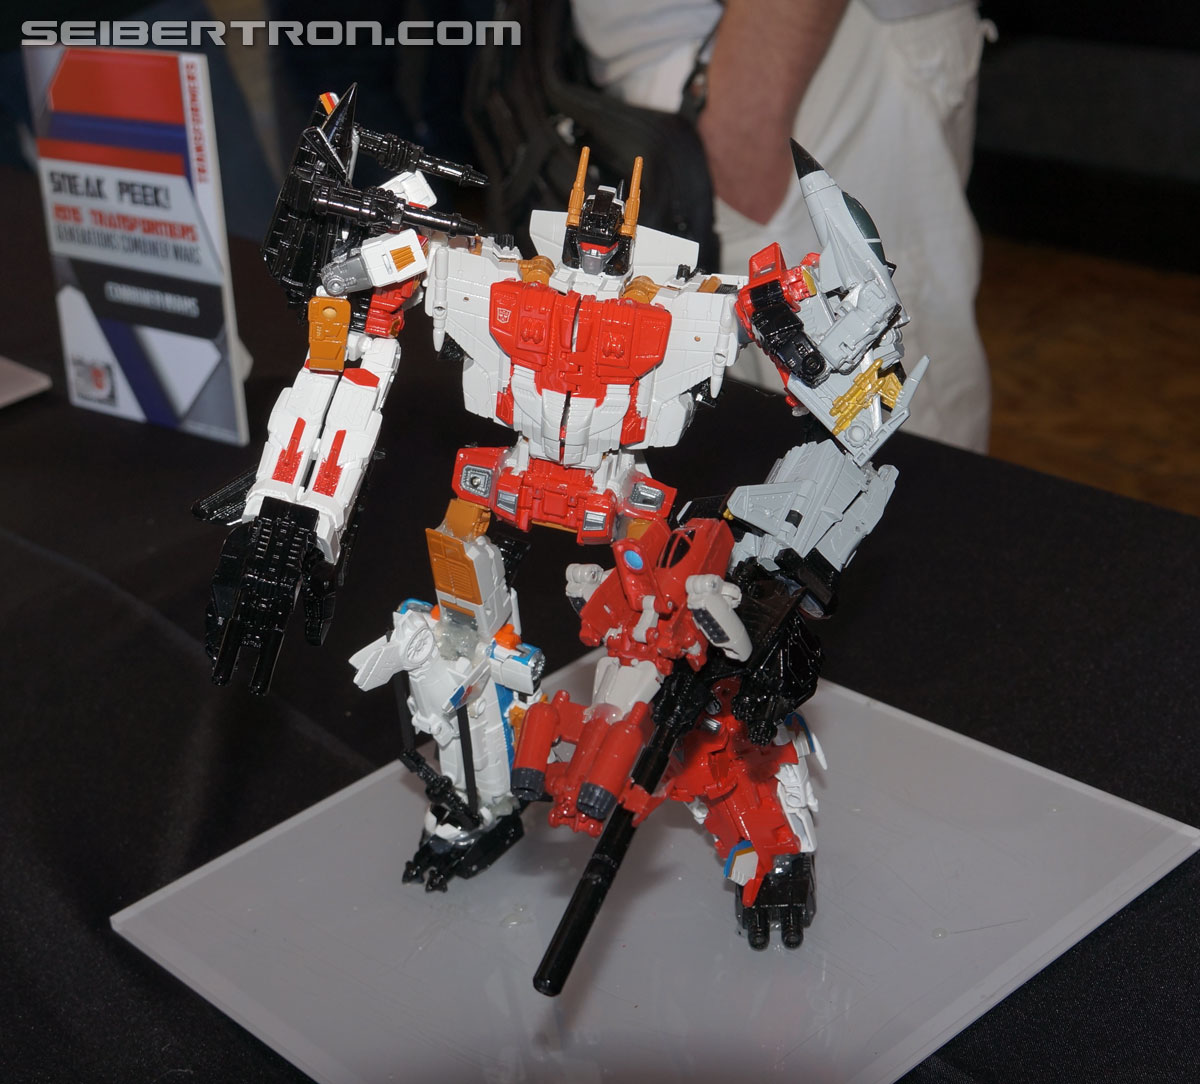 SDCC 2014 - COMBINERS!!! Menasor and Superion revealed!